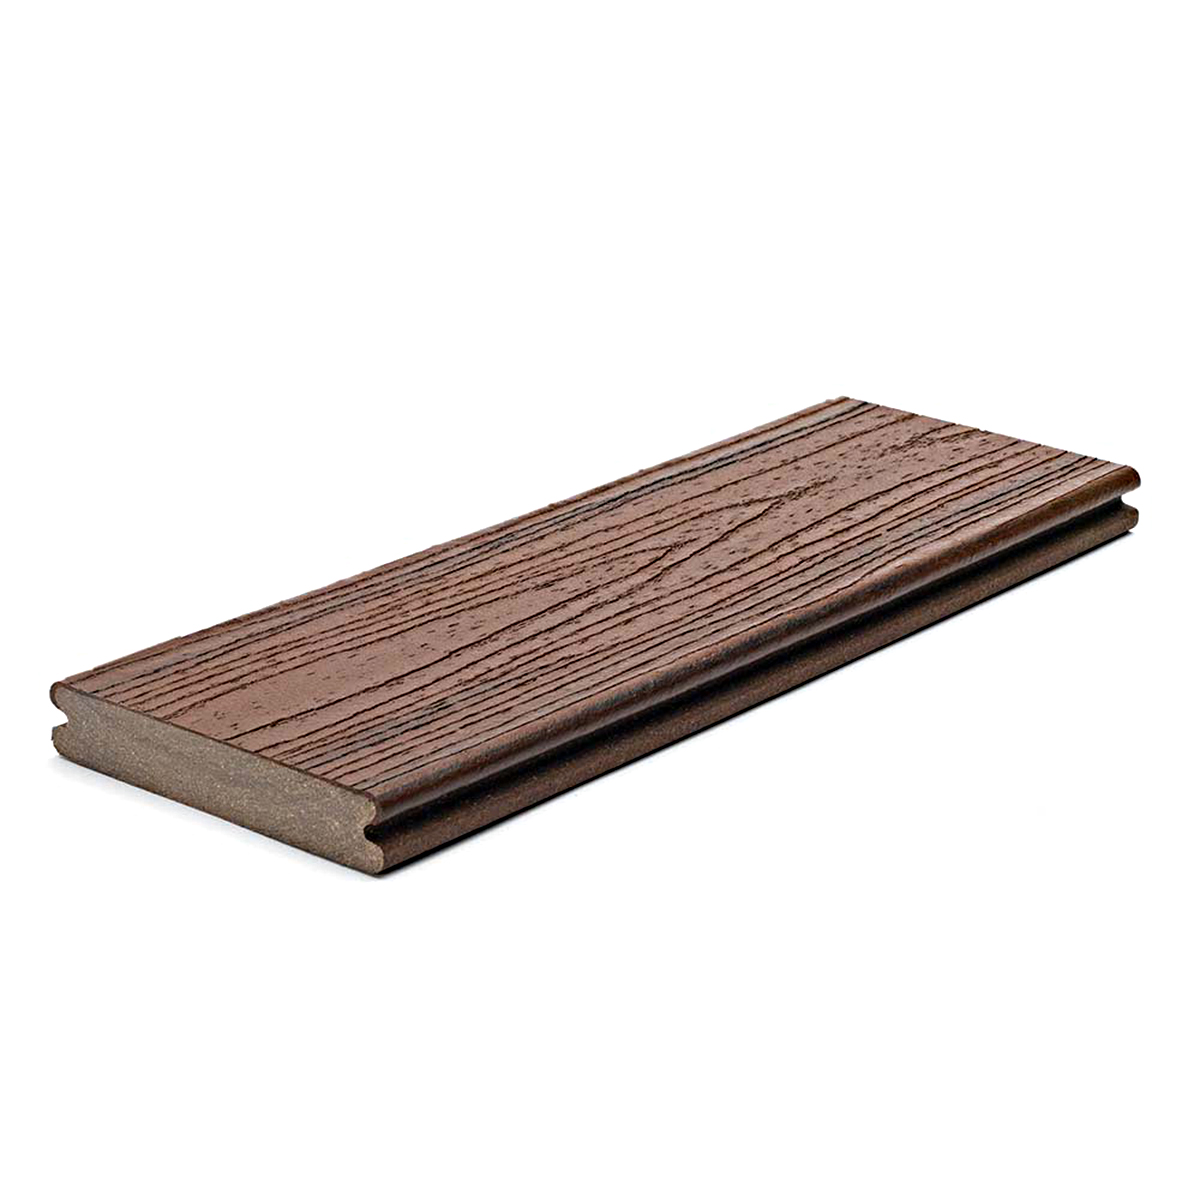 What Is Trex Decking Made Out Of